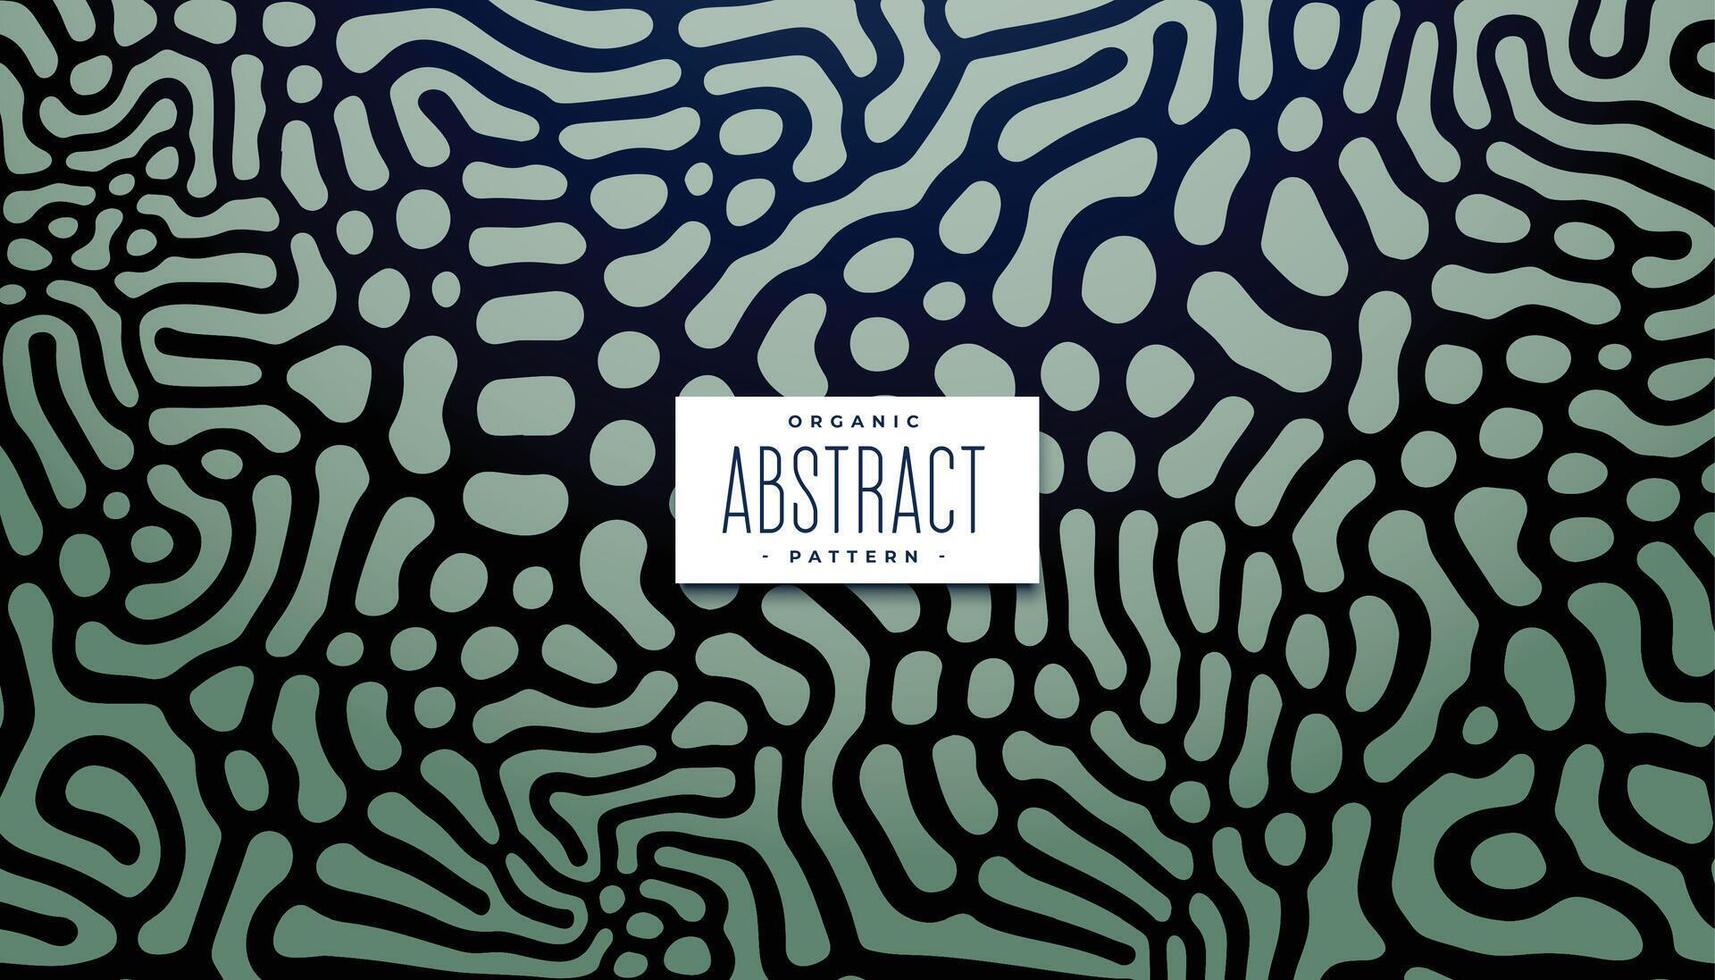 turing inspired abstract pattern wallpaper for biological print vector